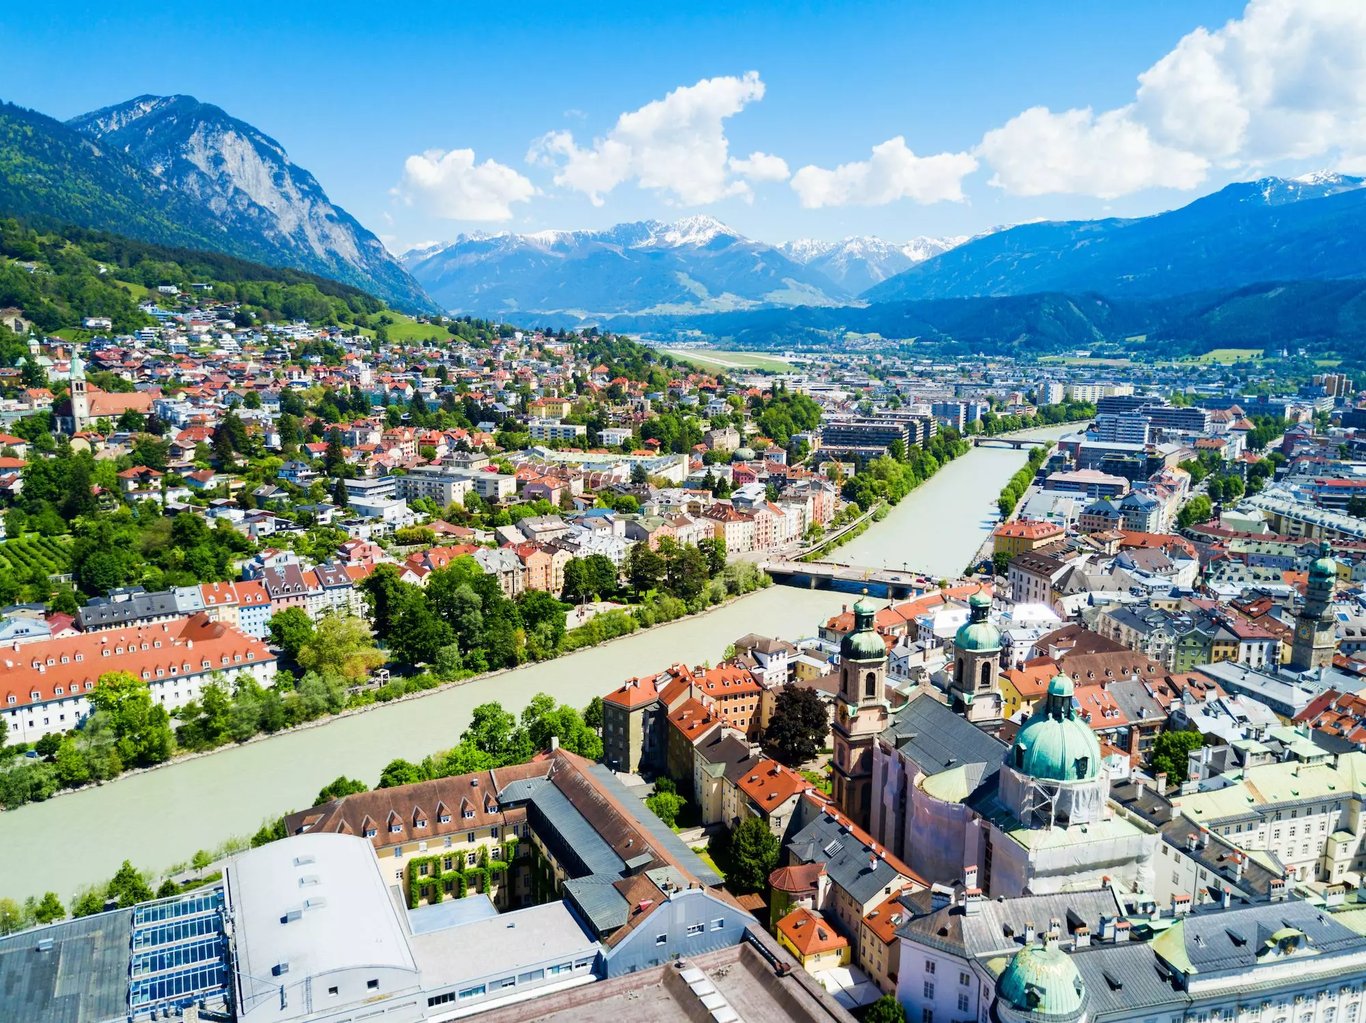 Innsbruck Top 17 Attractions - with maps and photos